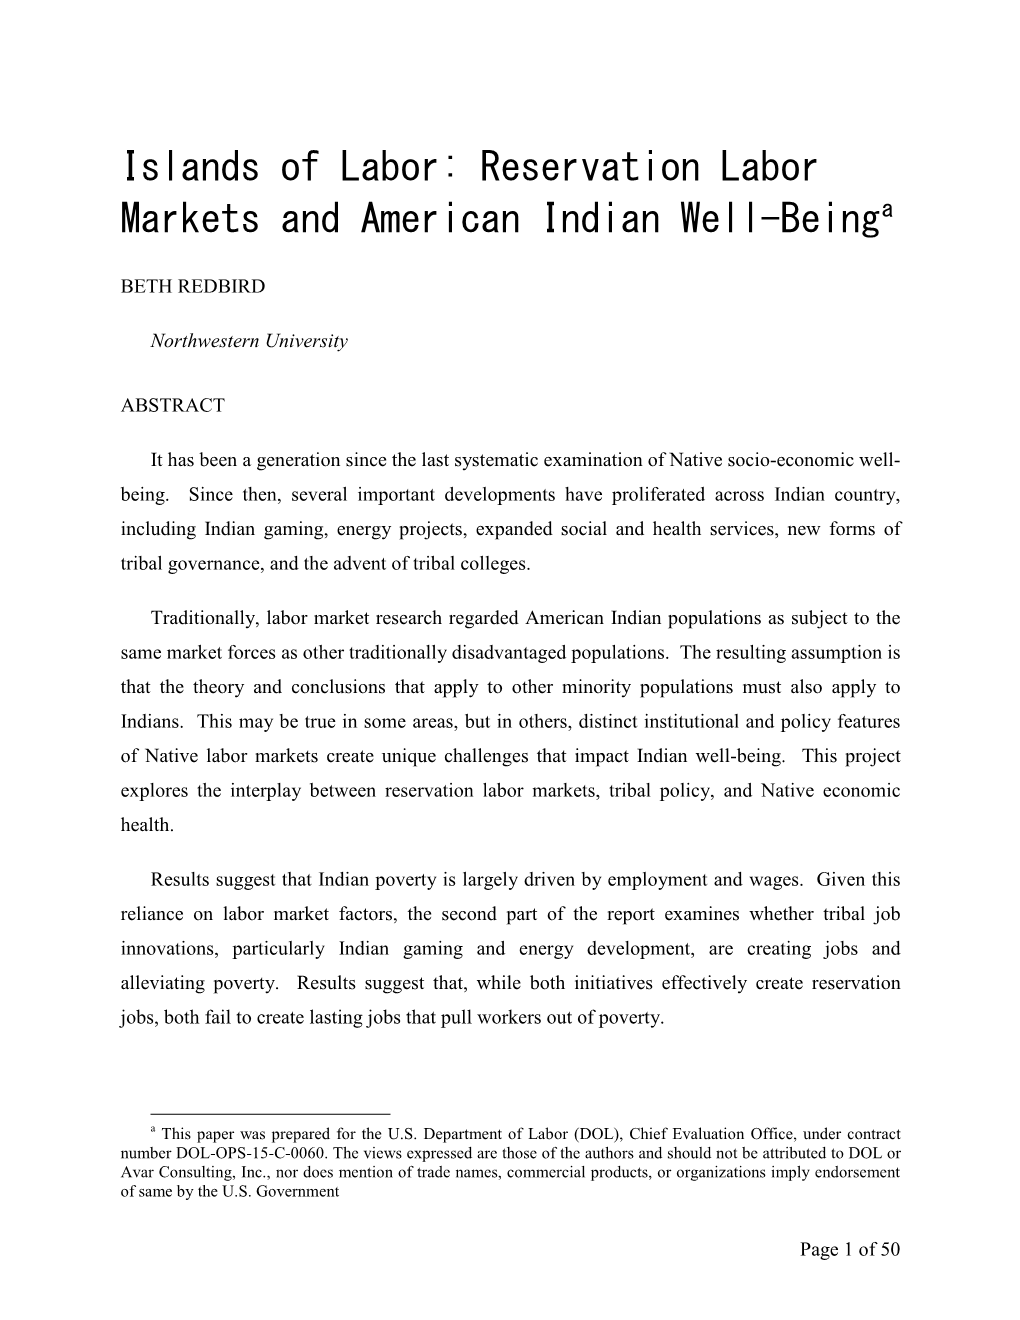 Islands of Labor: Reservation Labor Markets and American Indian Well-Beinga